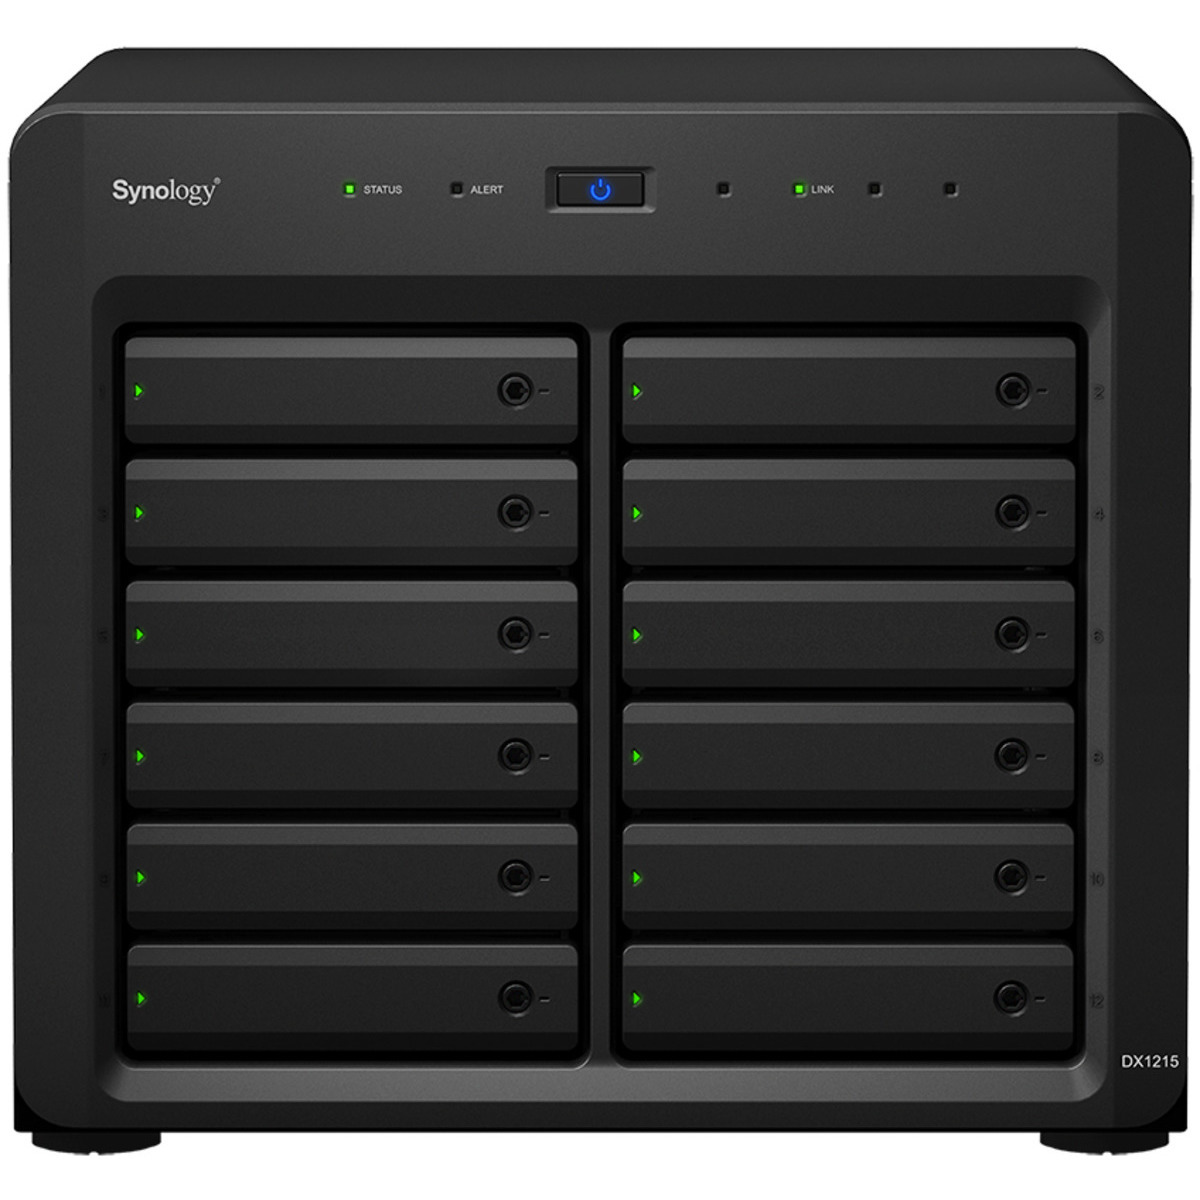 Synology DX1215II External Expansion Drive 5tb 12-Bay Desktop Multimedia / Power User / Business Expansion Enclosure 10x500gb Samsung 870 EVO MZ-77E500BAM 2.5 560/530MB/s SATA 6Gb/s SSD CONSUMER Class Drives Installed - Burn-In Tested DX1215II External Expansion Drive